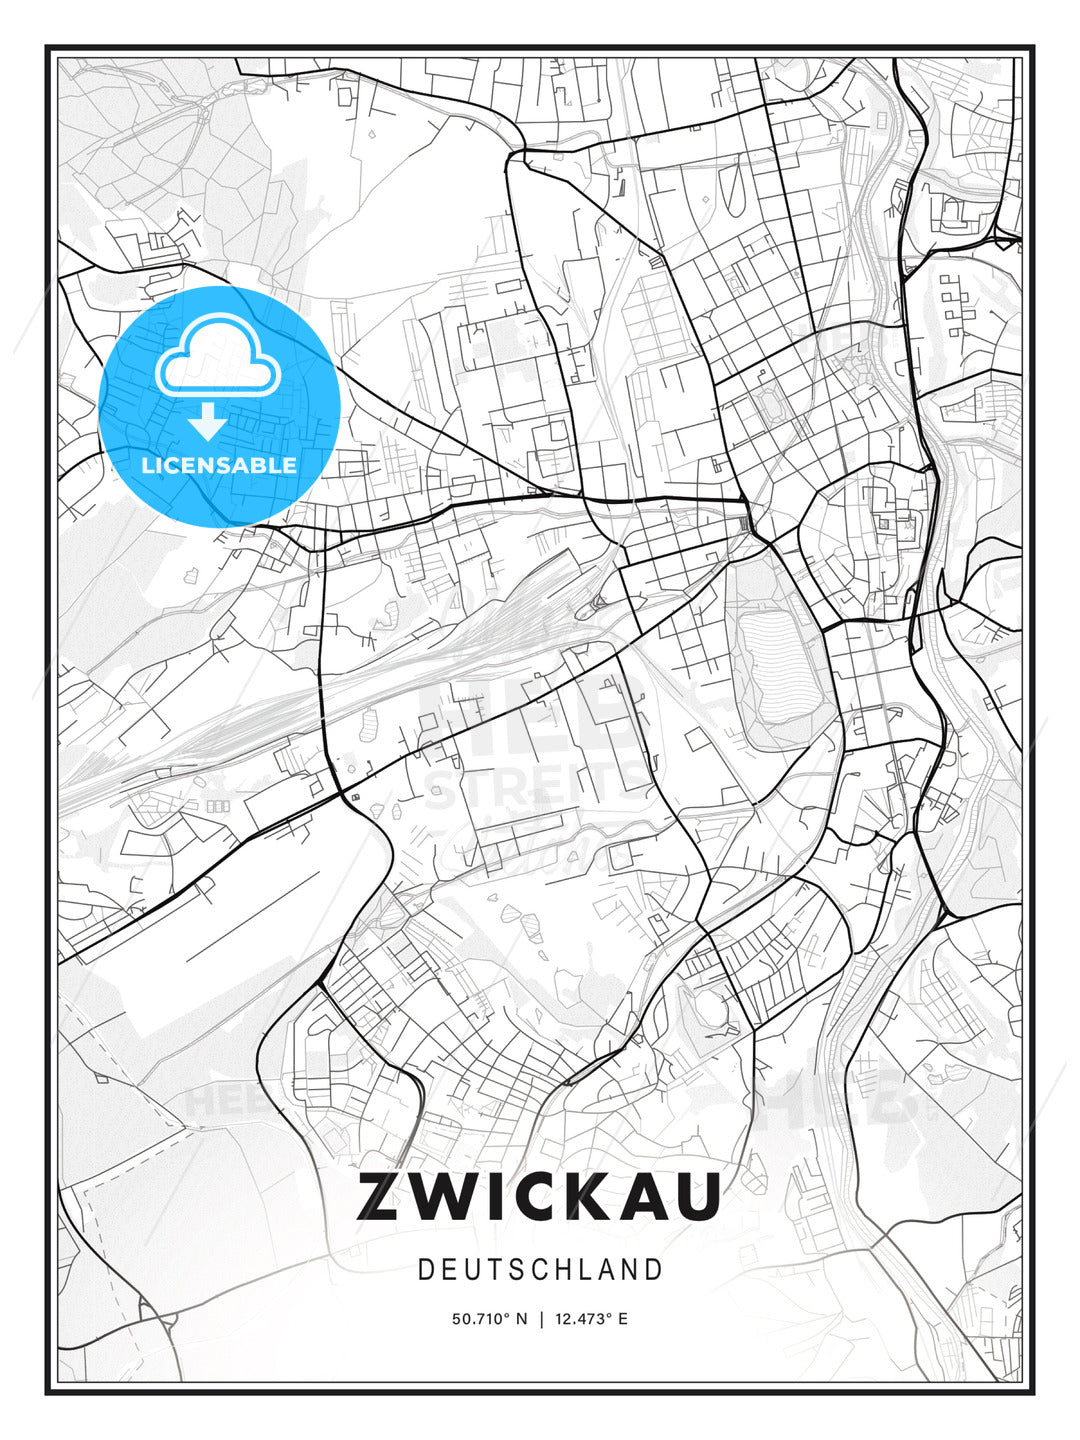 Zwickau, Germany, Modern Print Template in Various Formats - HEBSTREITS Sketches